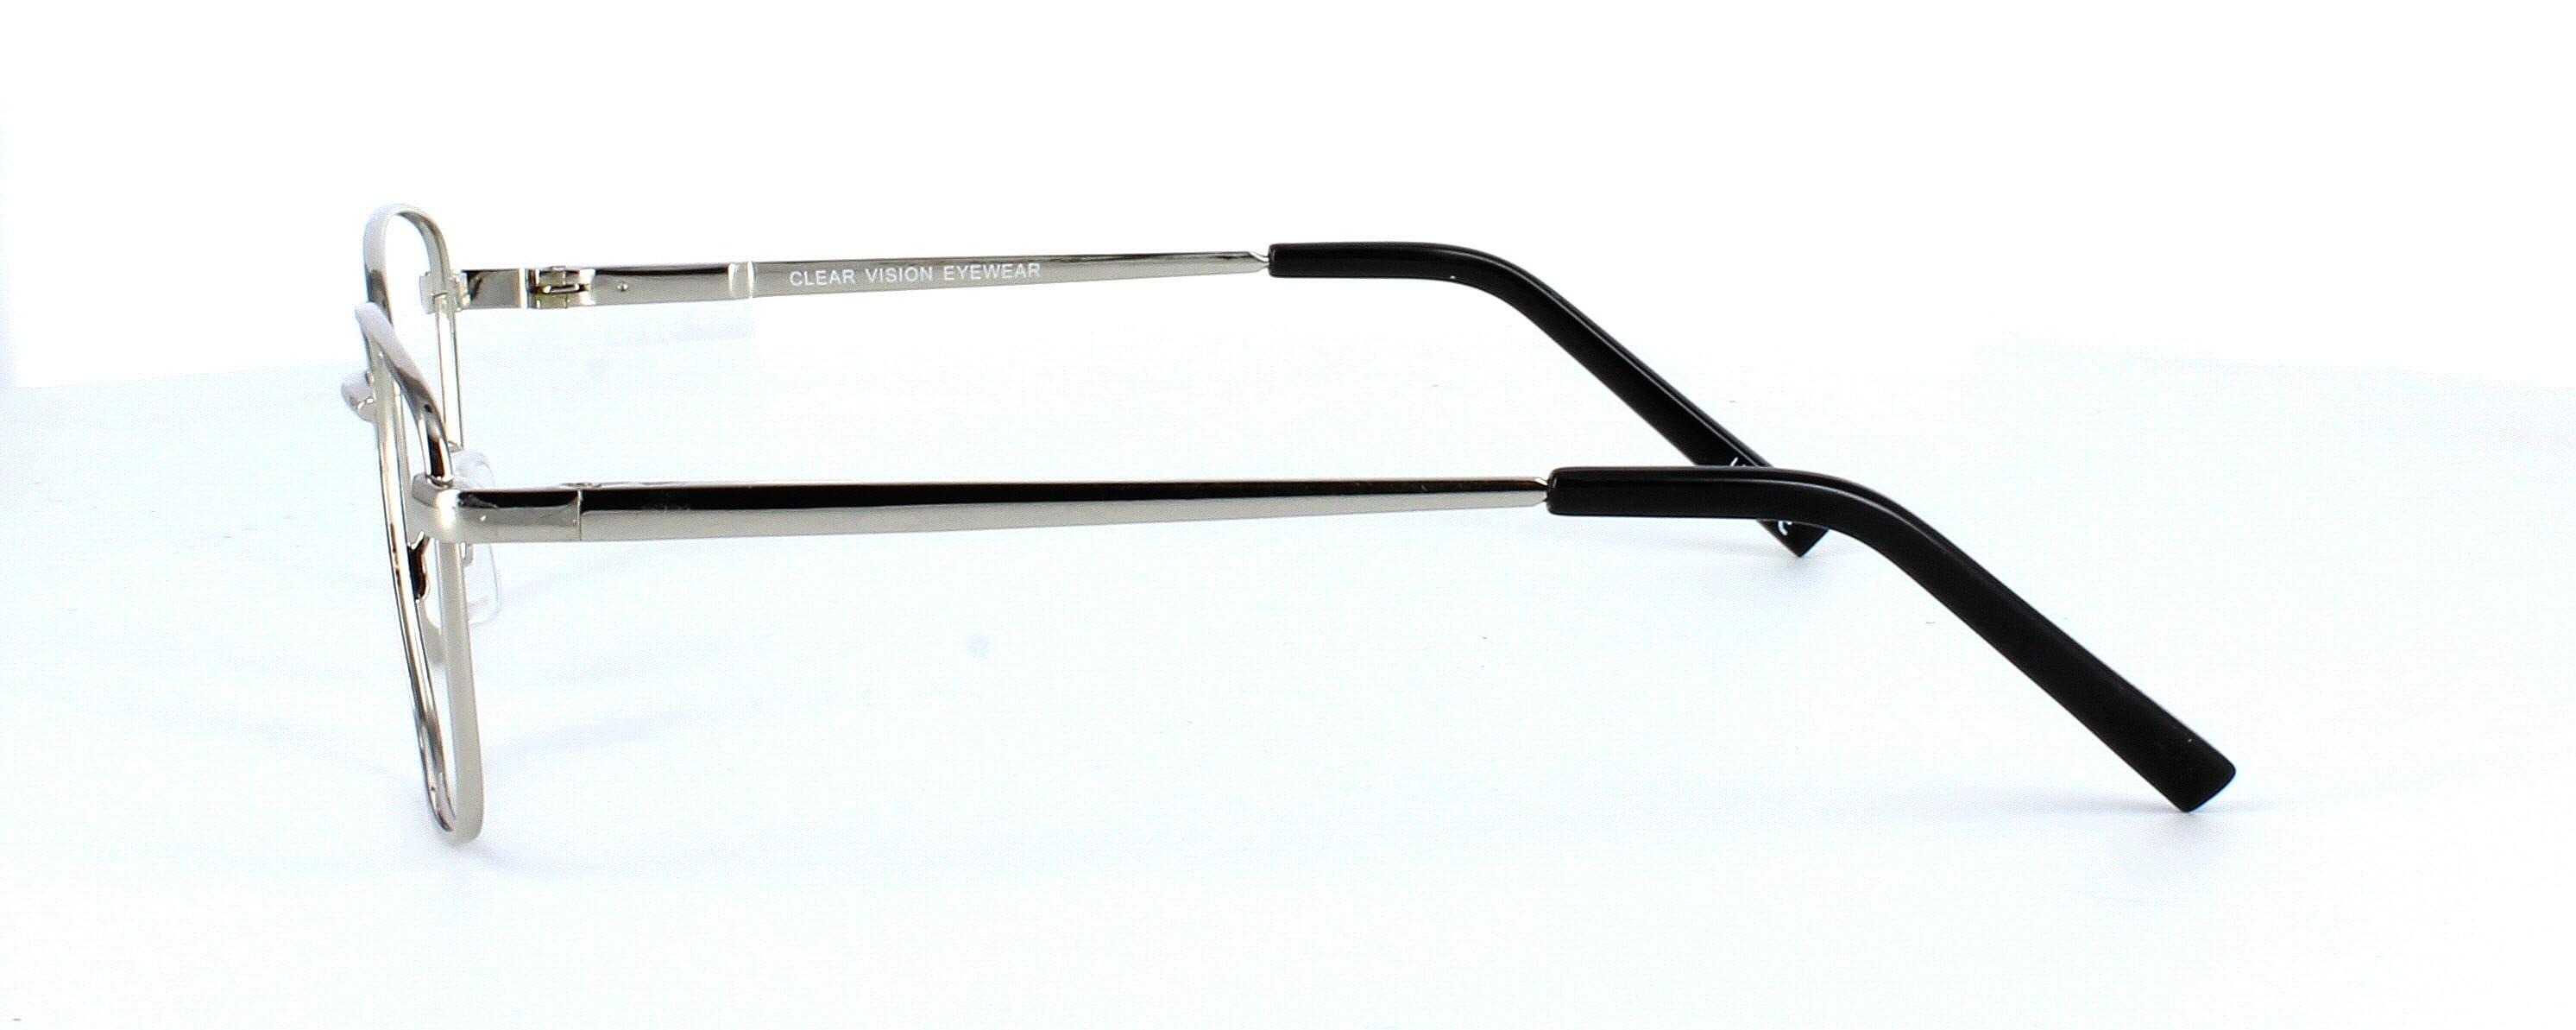 Blanko - Unisex shiny silver metal square shaped glasses with sprung hinge temple - image view 3